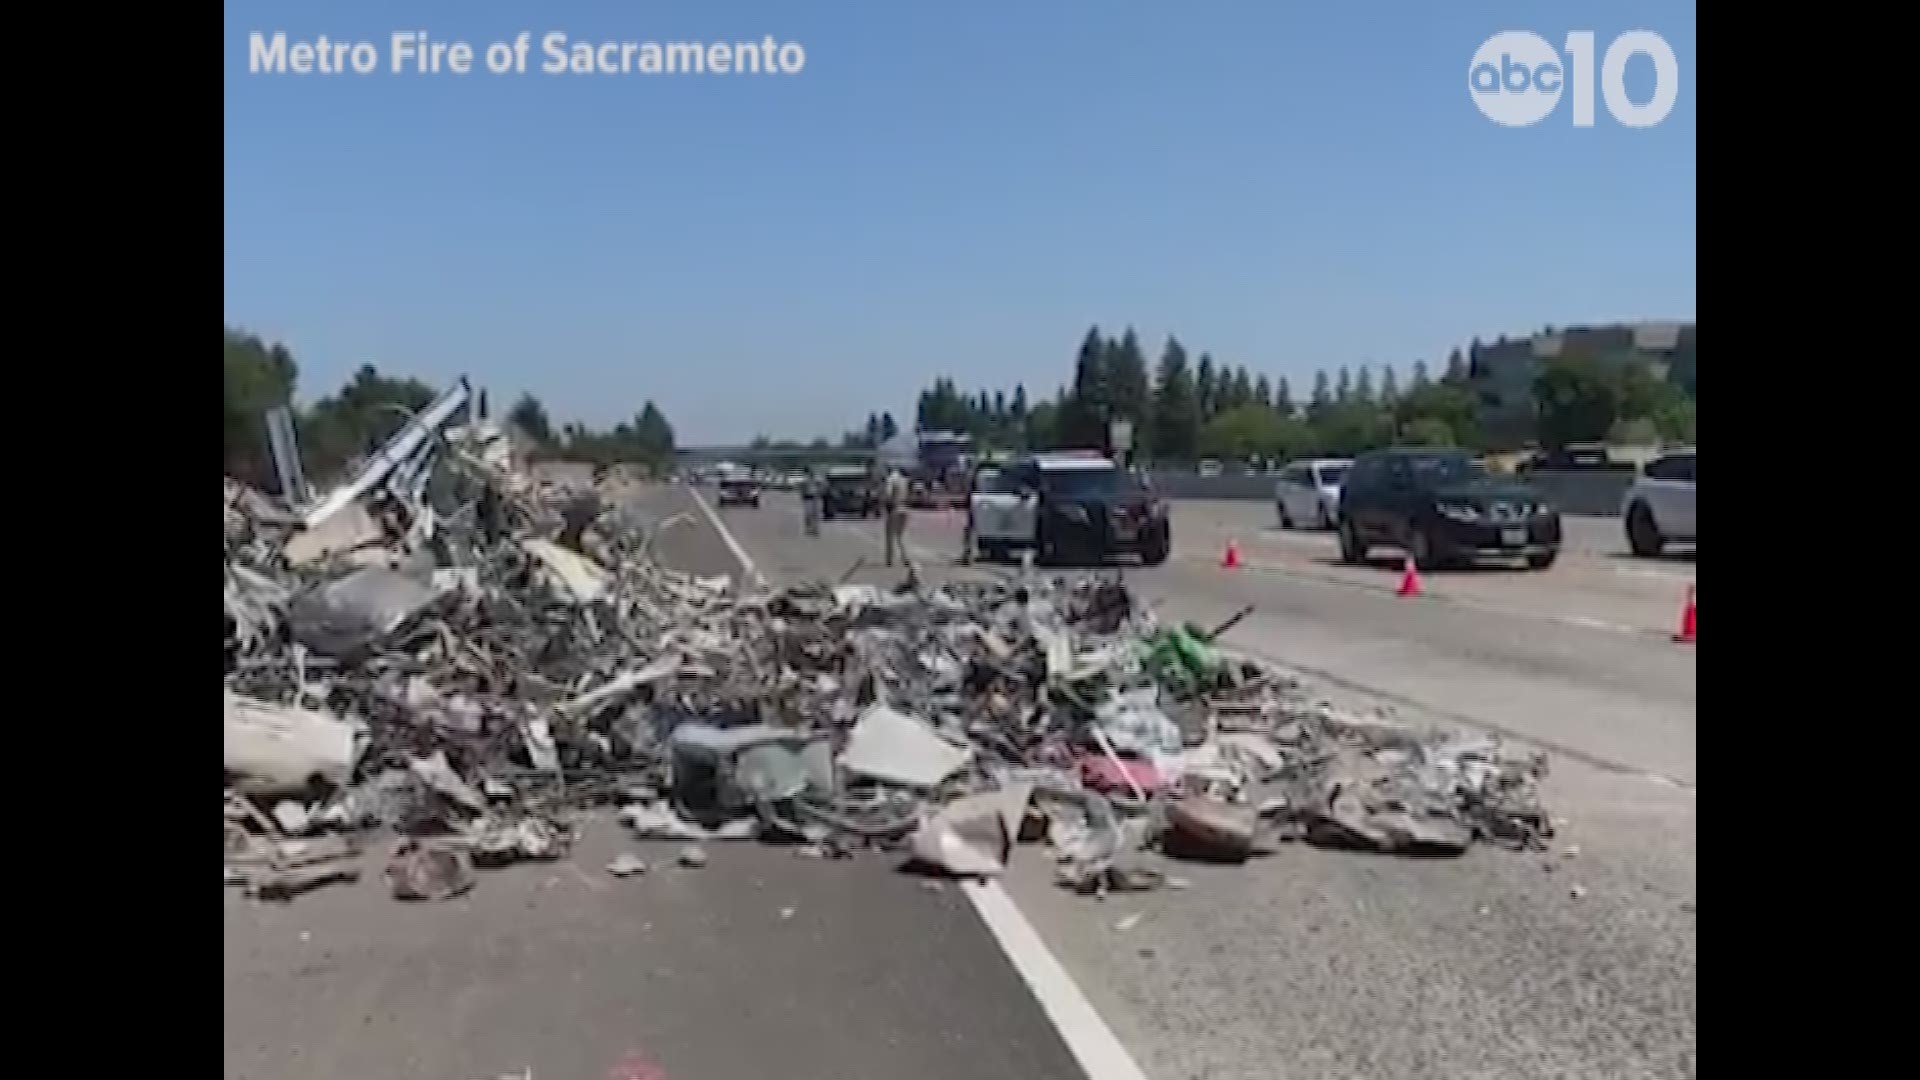 Traffic backed up on U.S. Route 50 Wednesday, after a dump truck overturned around 1:40 p.m., according to Sacramento Metro Fire District. 

Metro Fire tweeted out a report of the accident and shared several photos and videos of the scene — showing the overturned dump truck on the westbound U.S-50, near the freeway entrance just east of Watt Avenue.